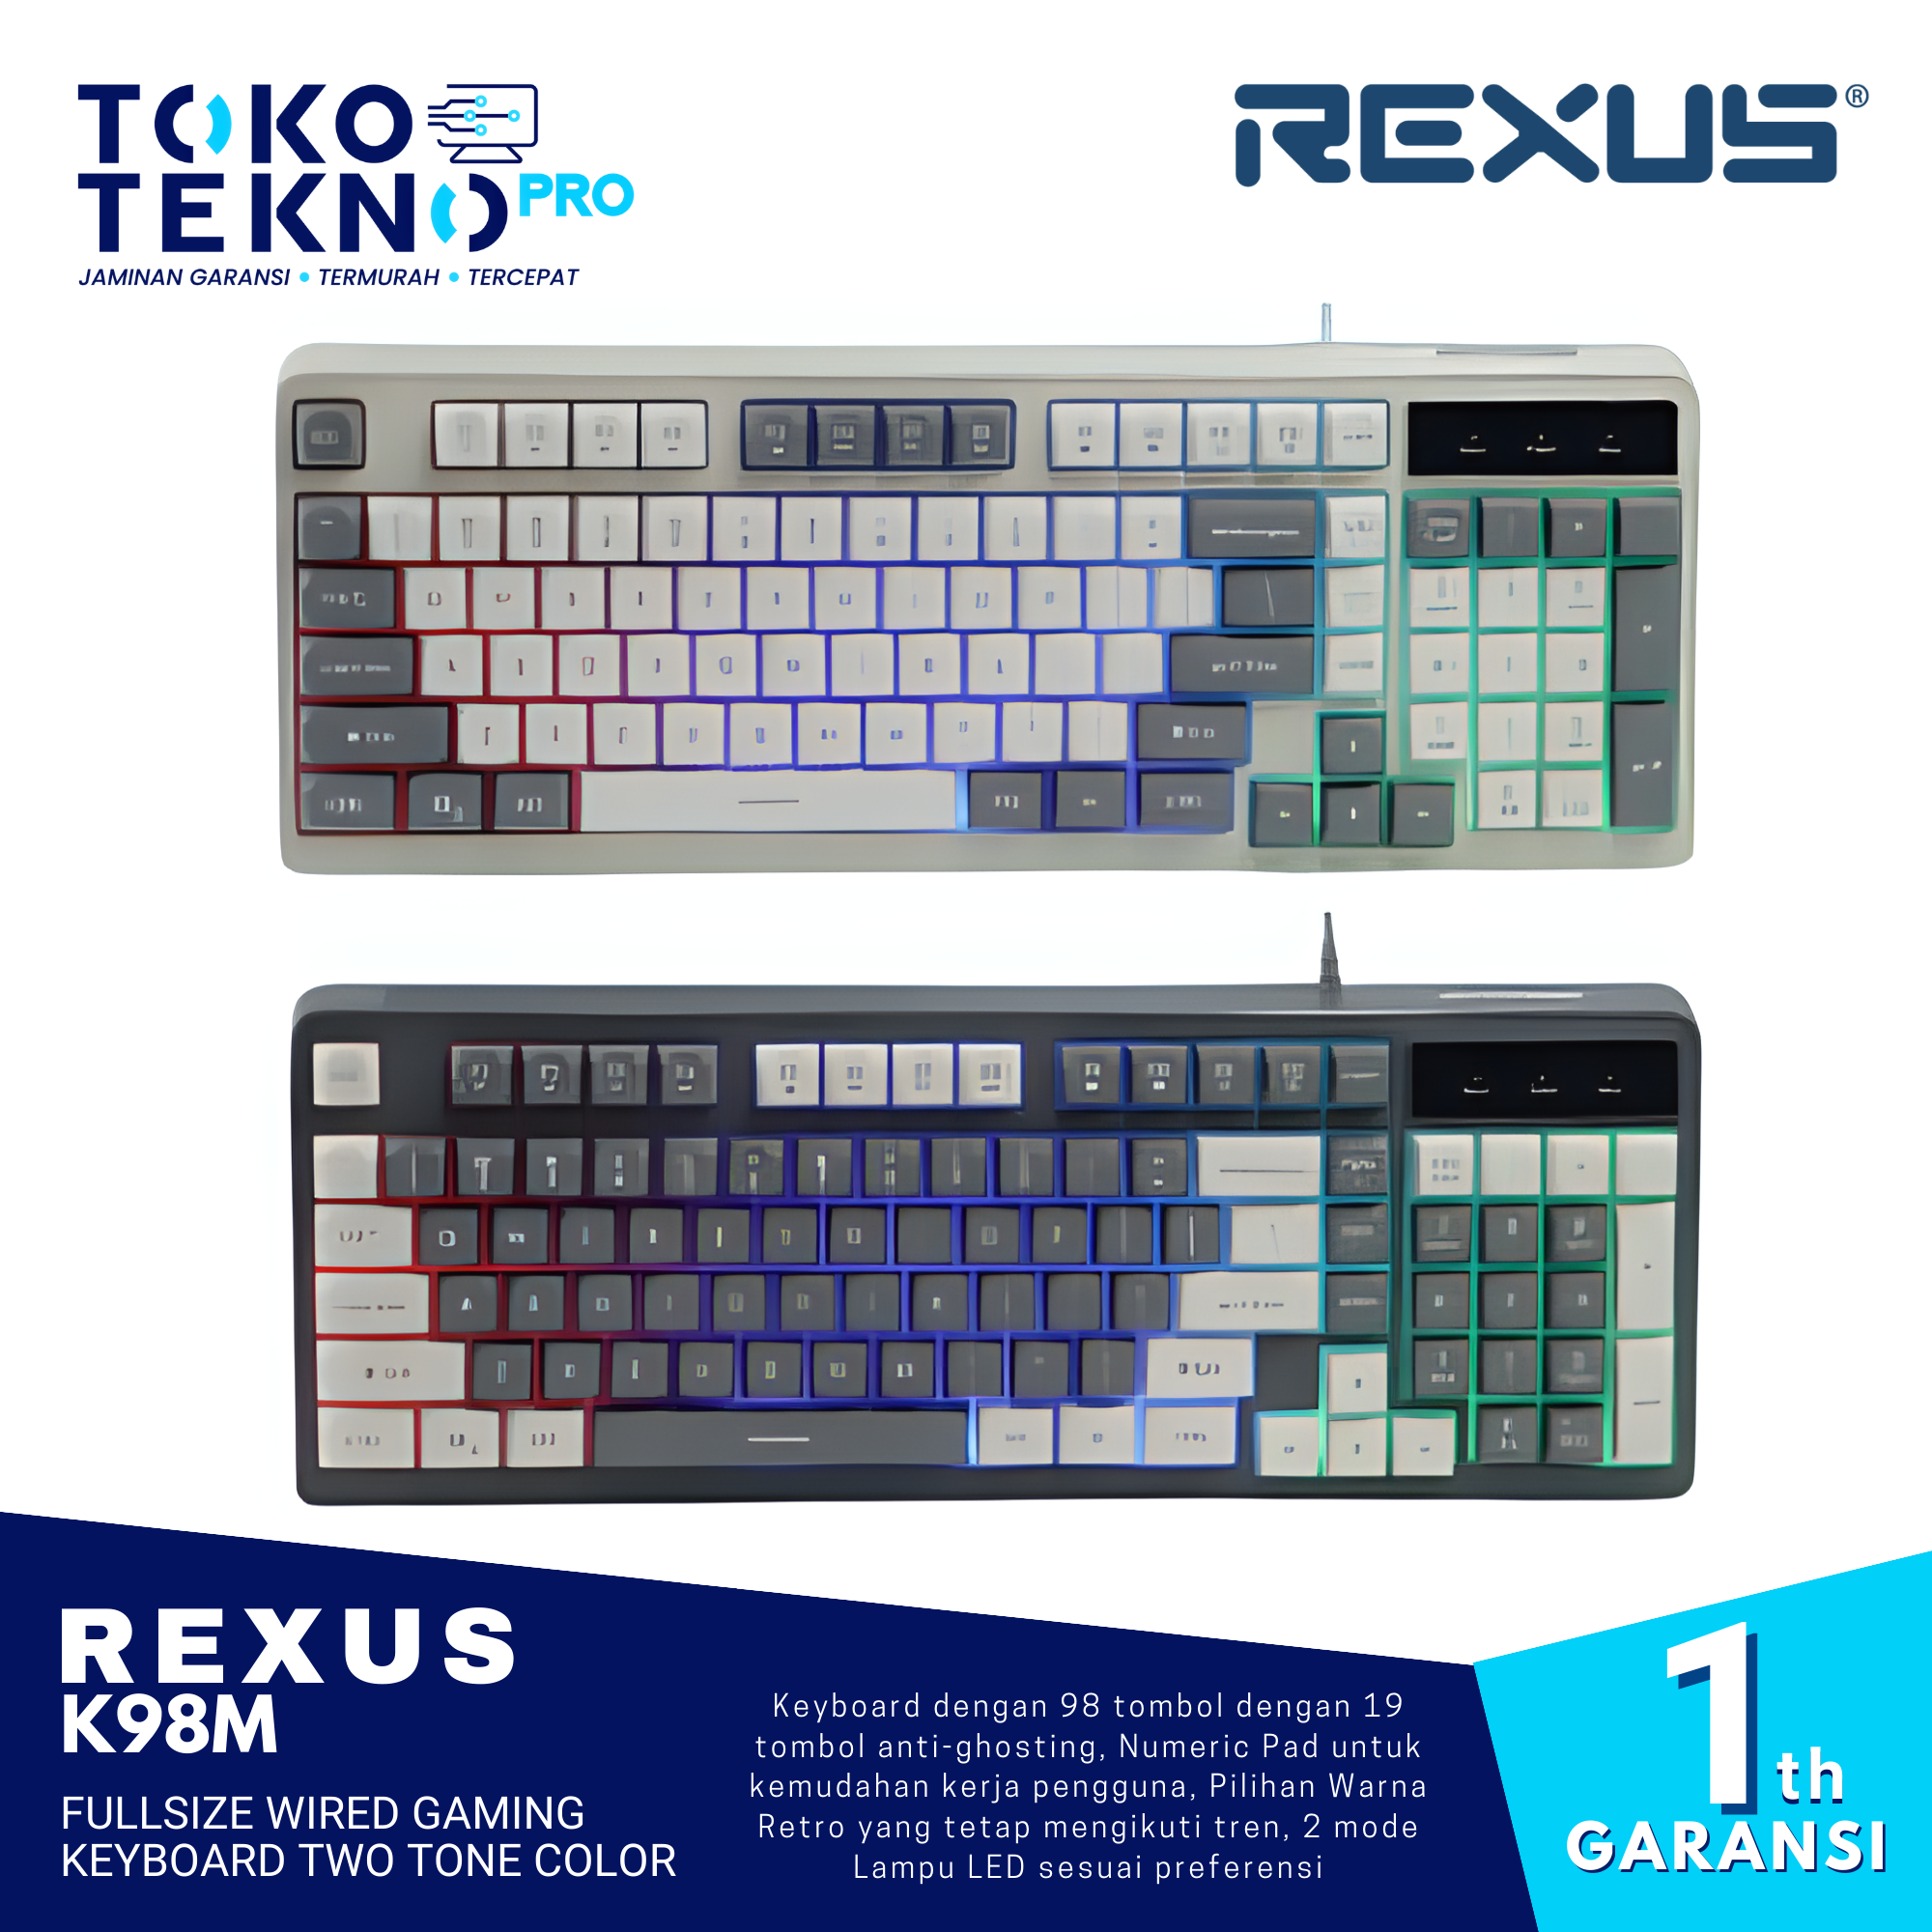 Rexus K98M Fullsize Wired Gaming Keyboard Two Tone Color